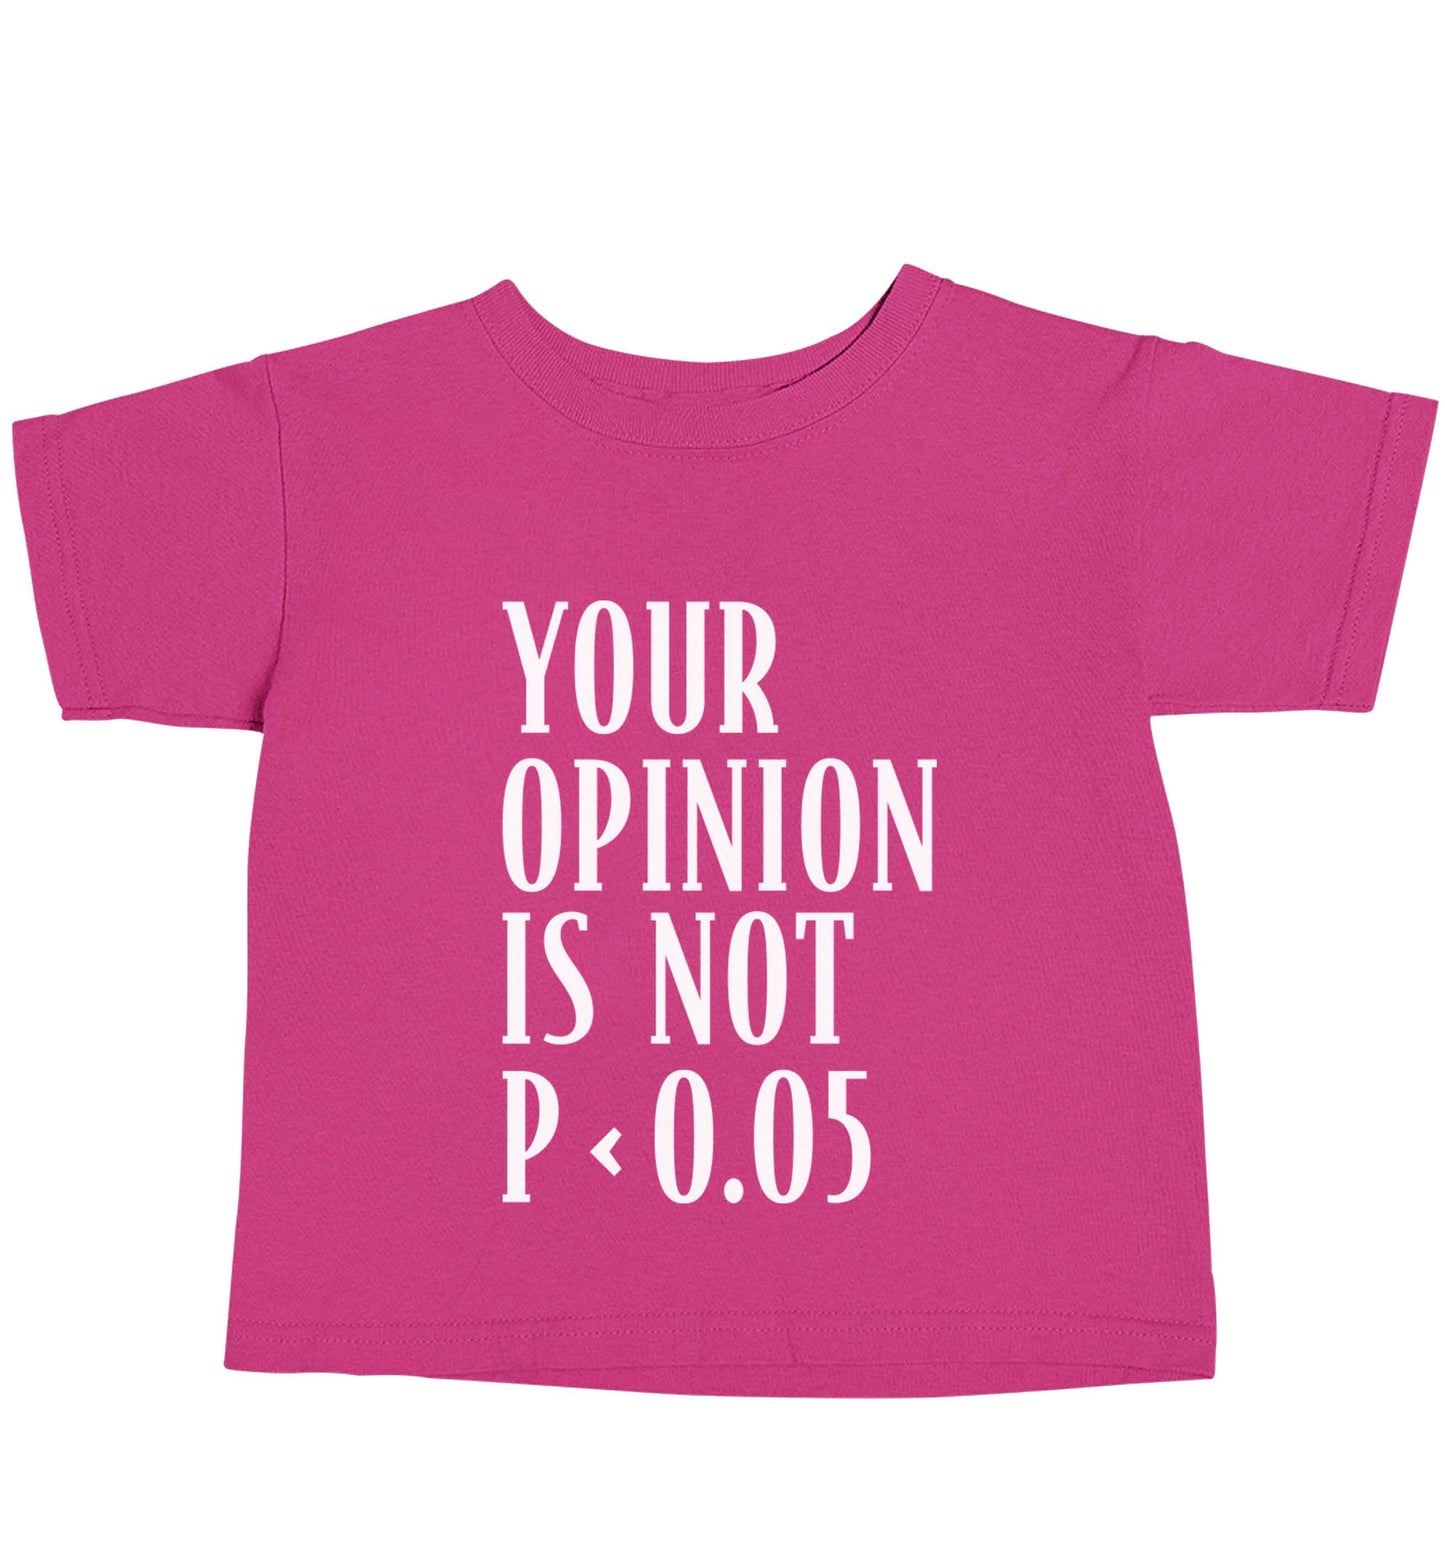 Your opinion is not P < 0.05pink baby toddler Tshirt 2 Years